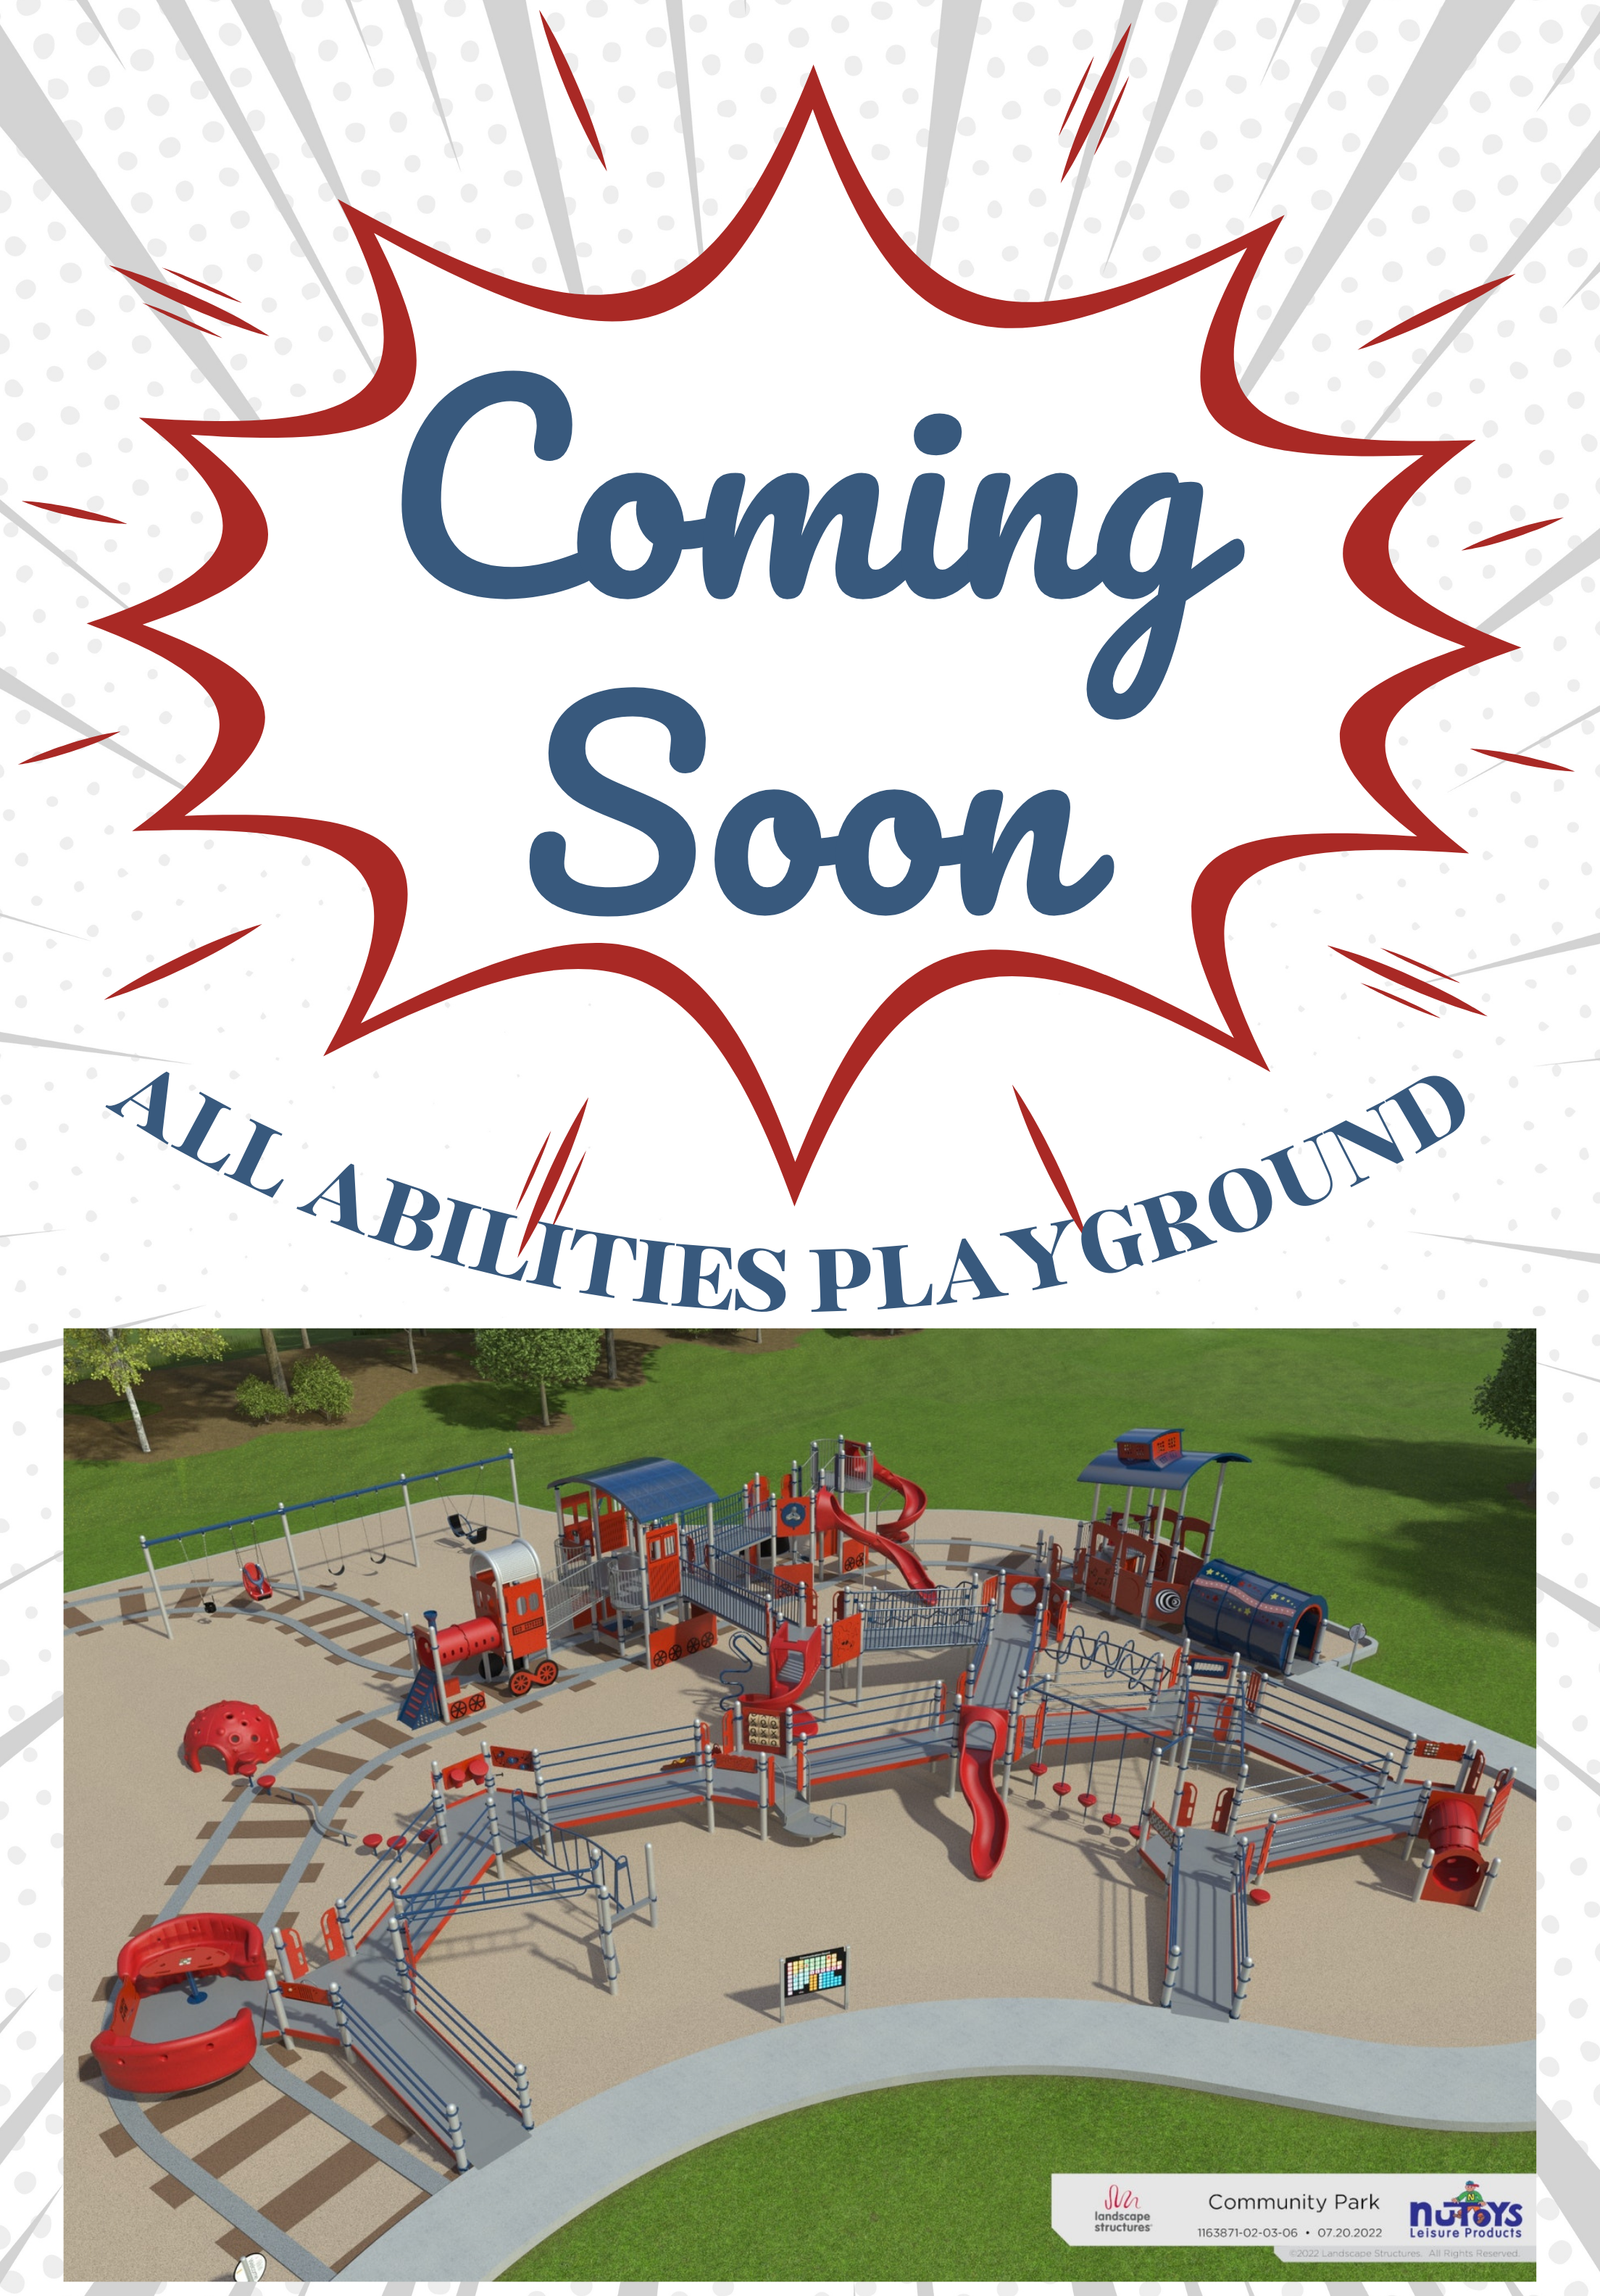 All-Abilities Playground